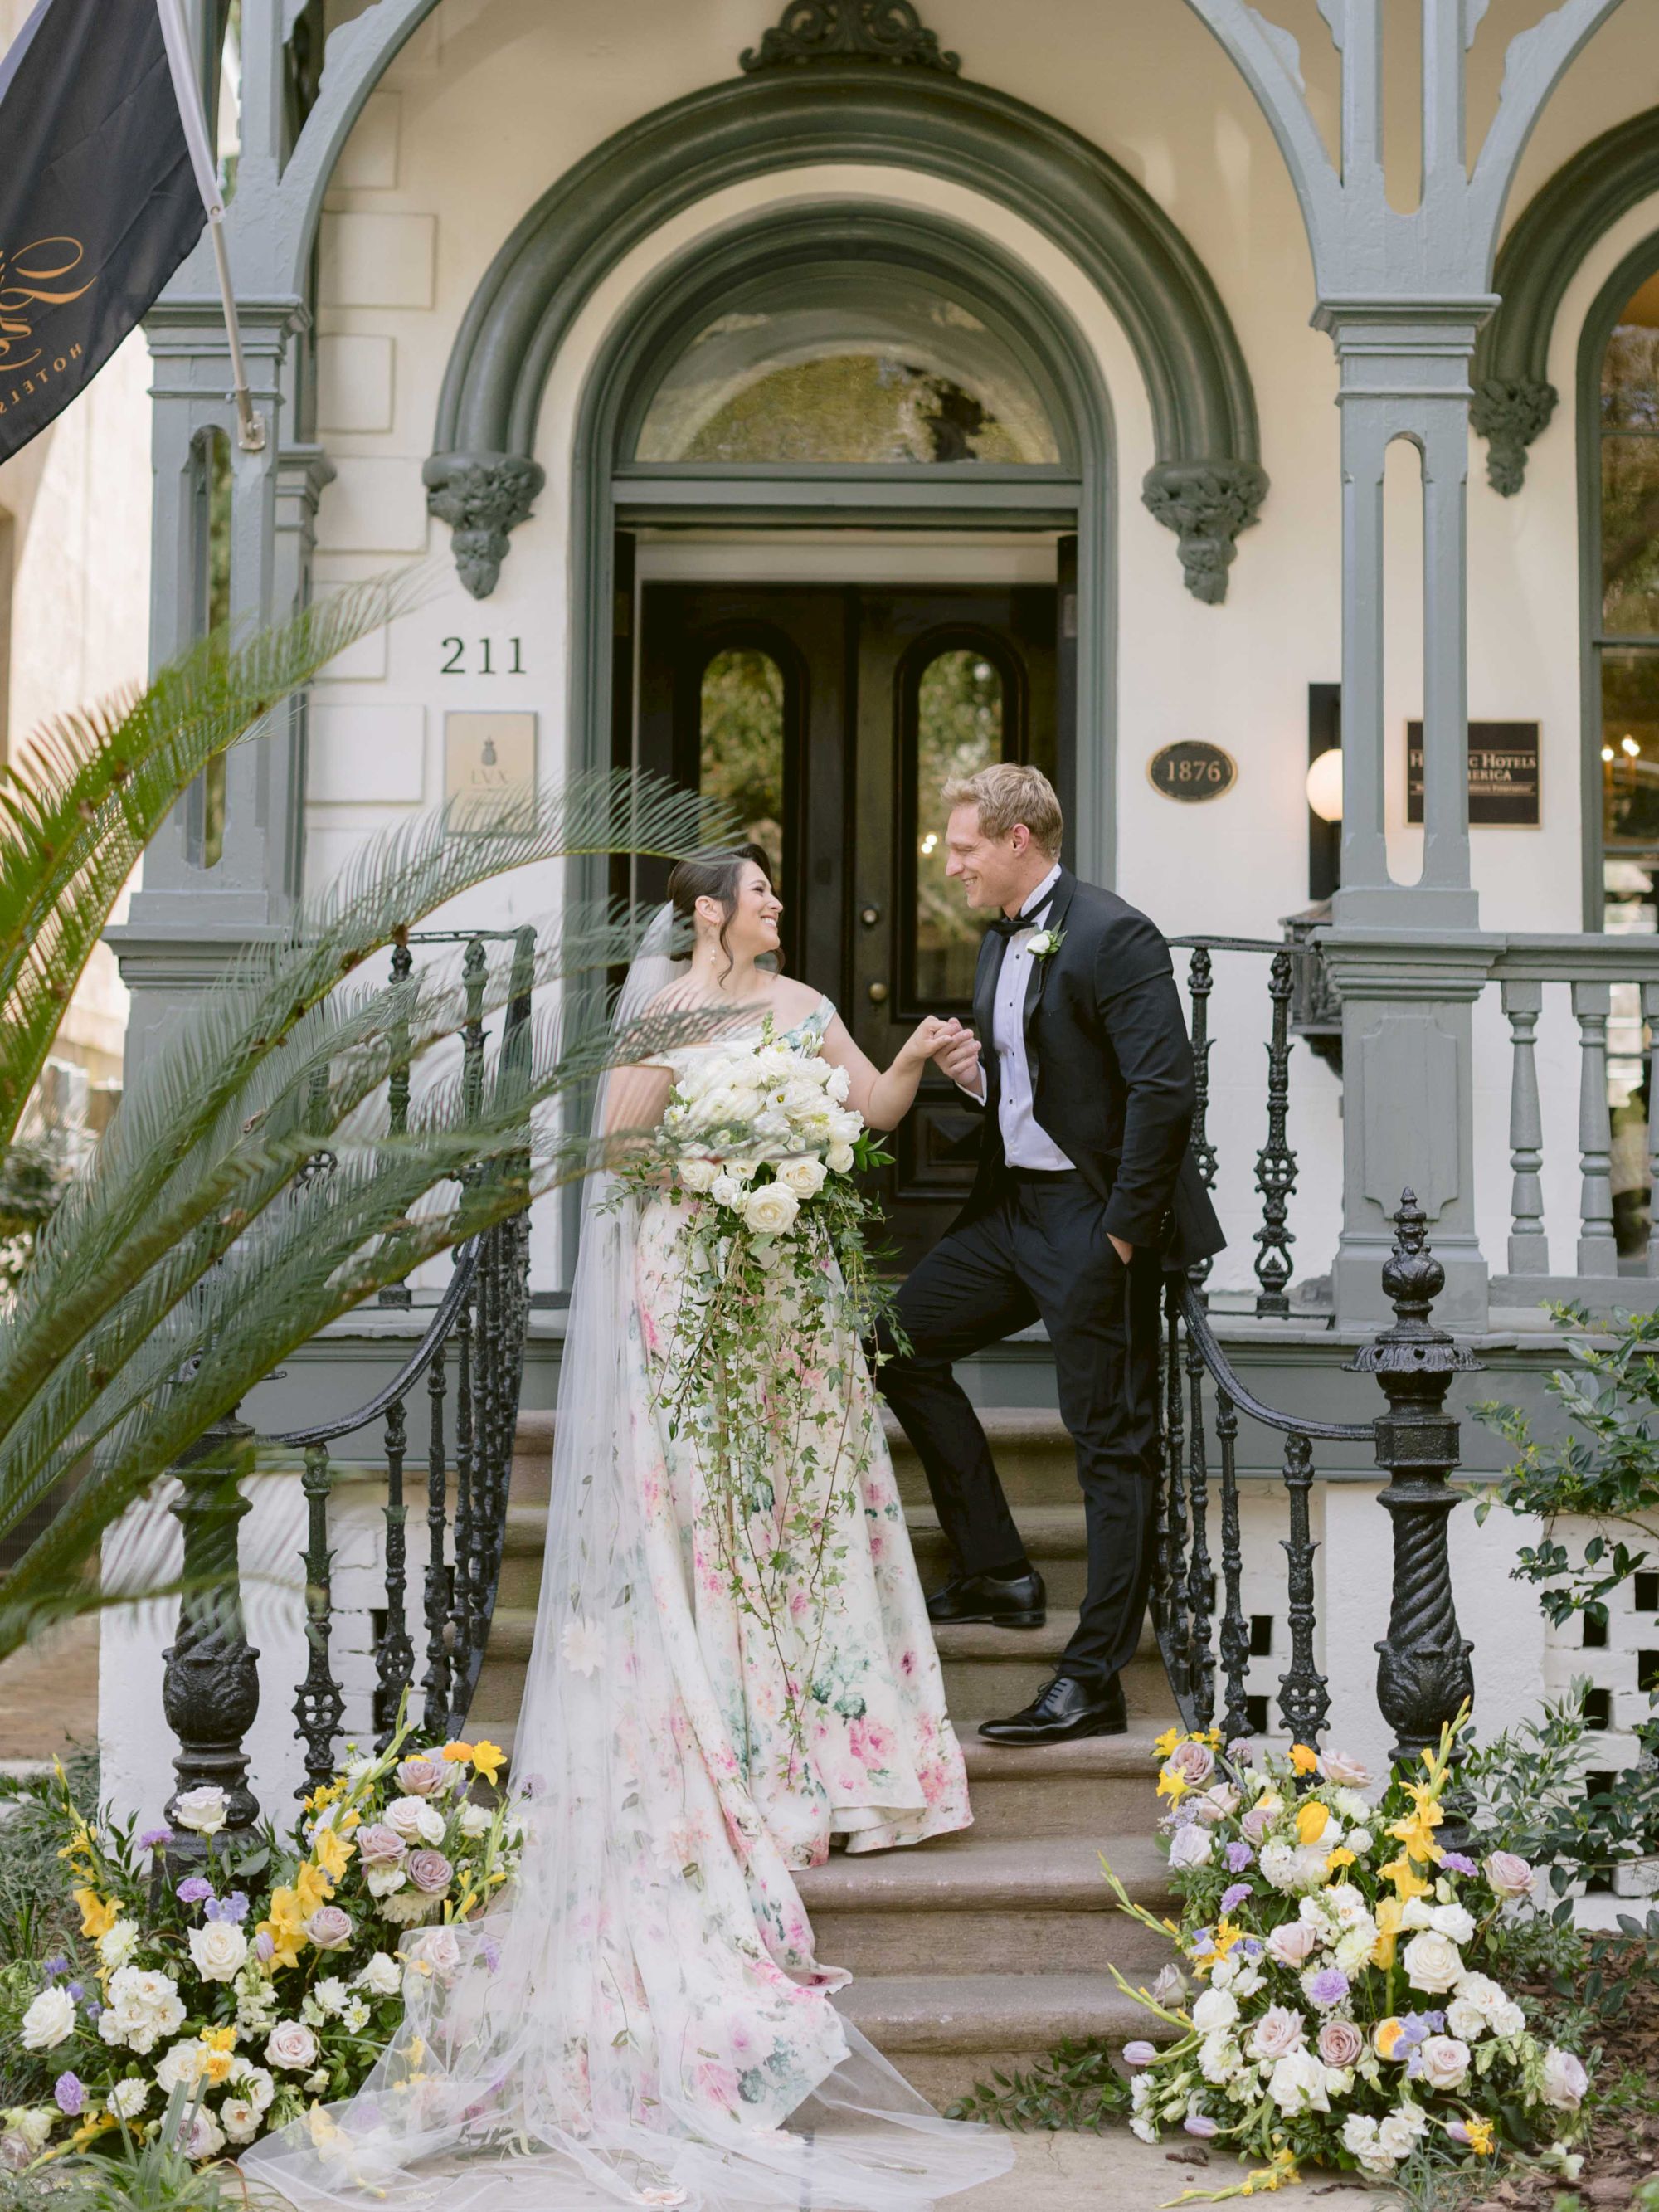 A bride and groom pose on the steps of a decorative building, surrounded by greenery and flowers, creating a picturesque wedding scene.